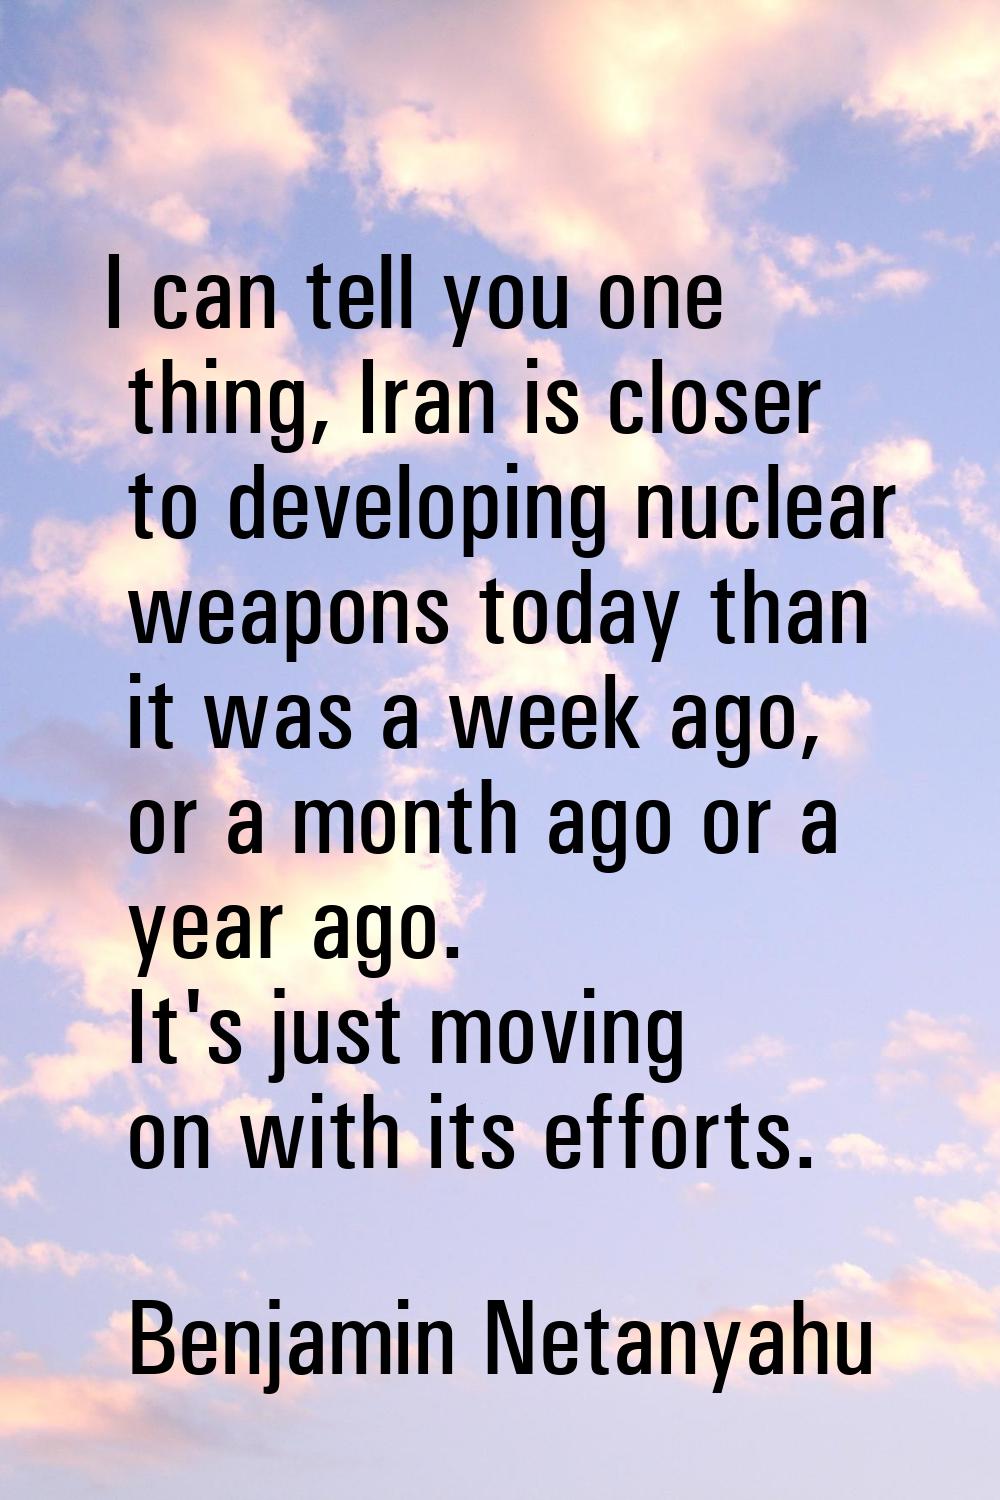 I can tell you one thing, Iran is closer to developing nuclear weapons today than it was a week ago